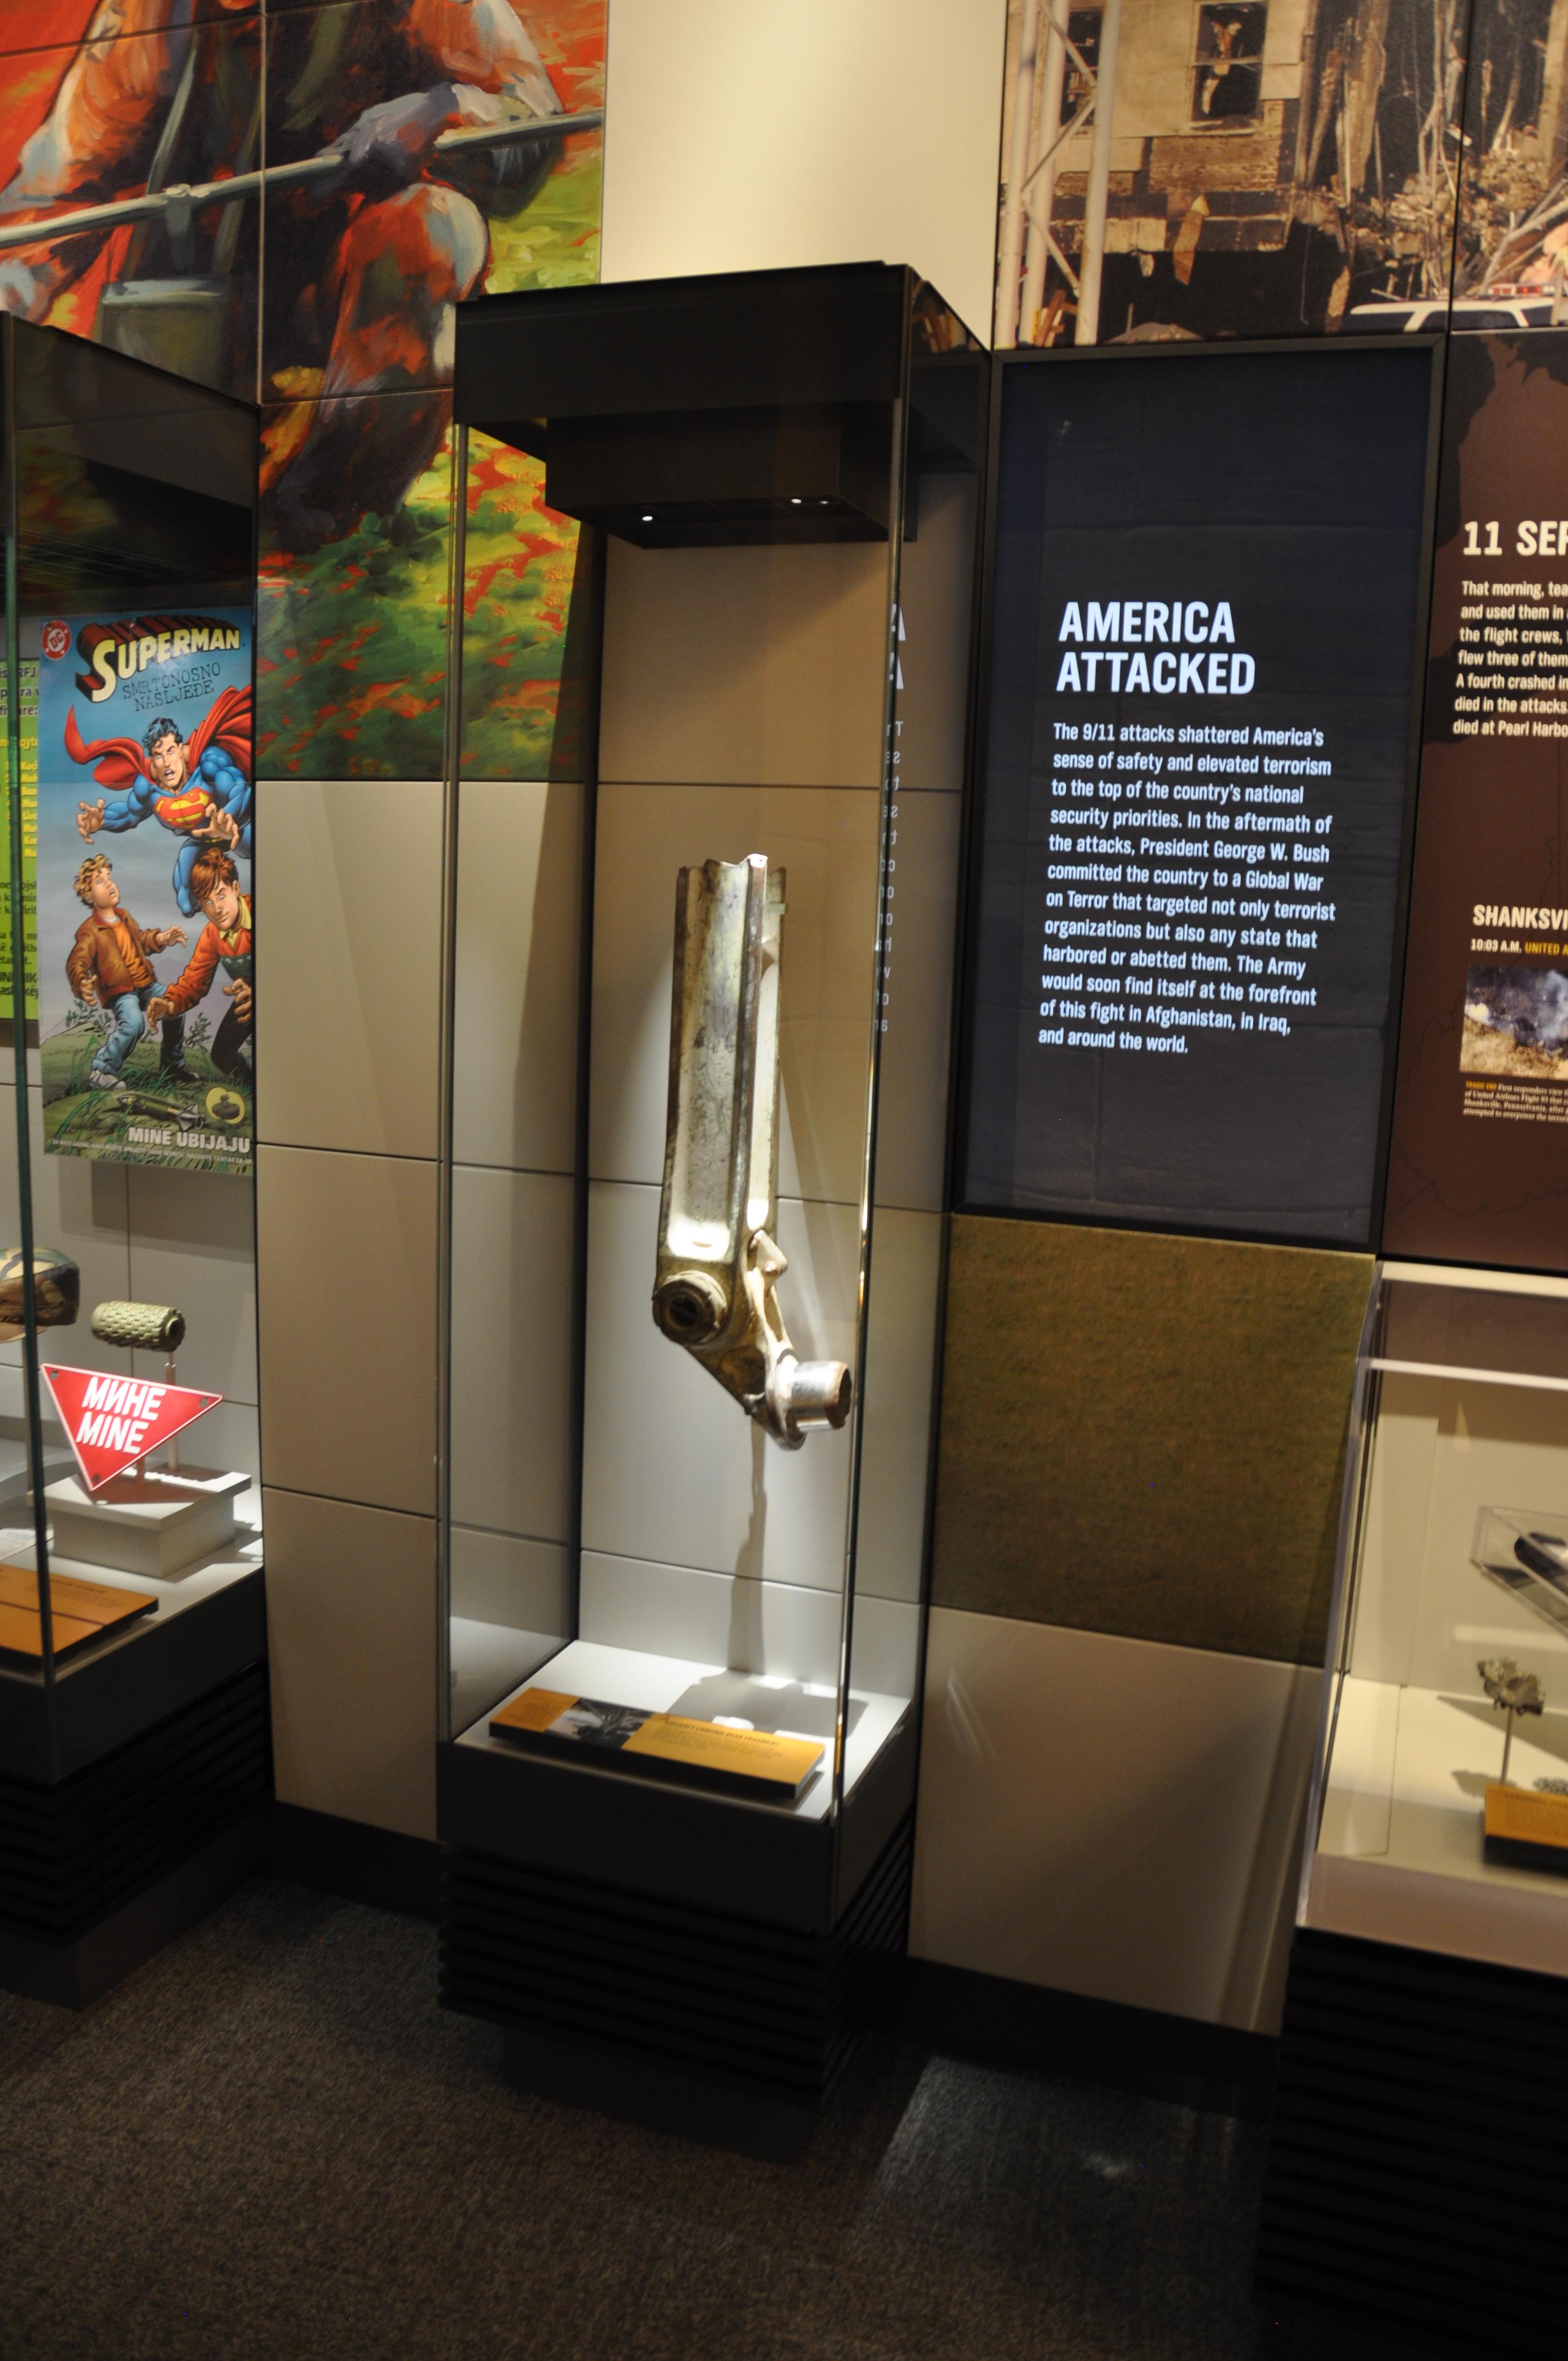 Exhibit of an airplane part from September 11 attacks in New York